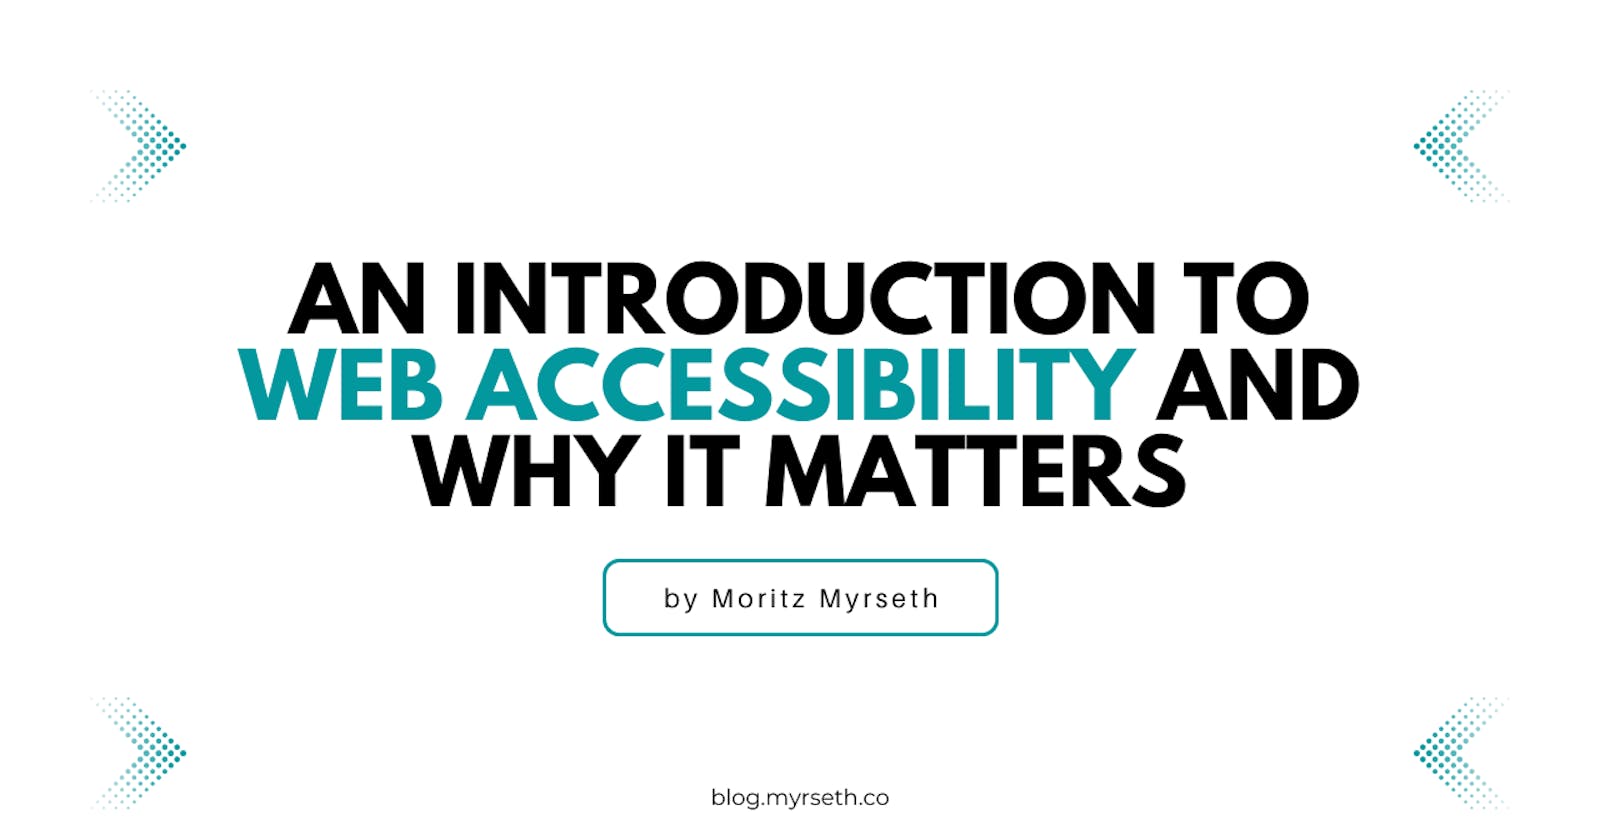 An Introduction to Web Accessibility and Why It Matters